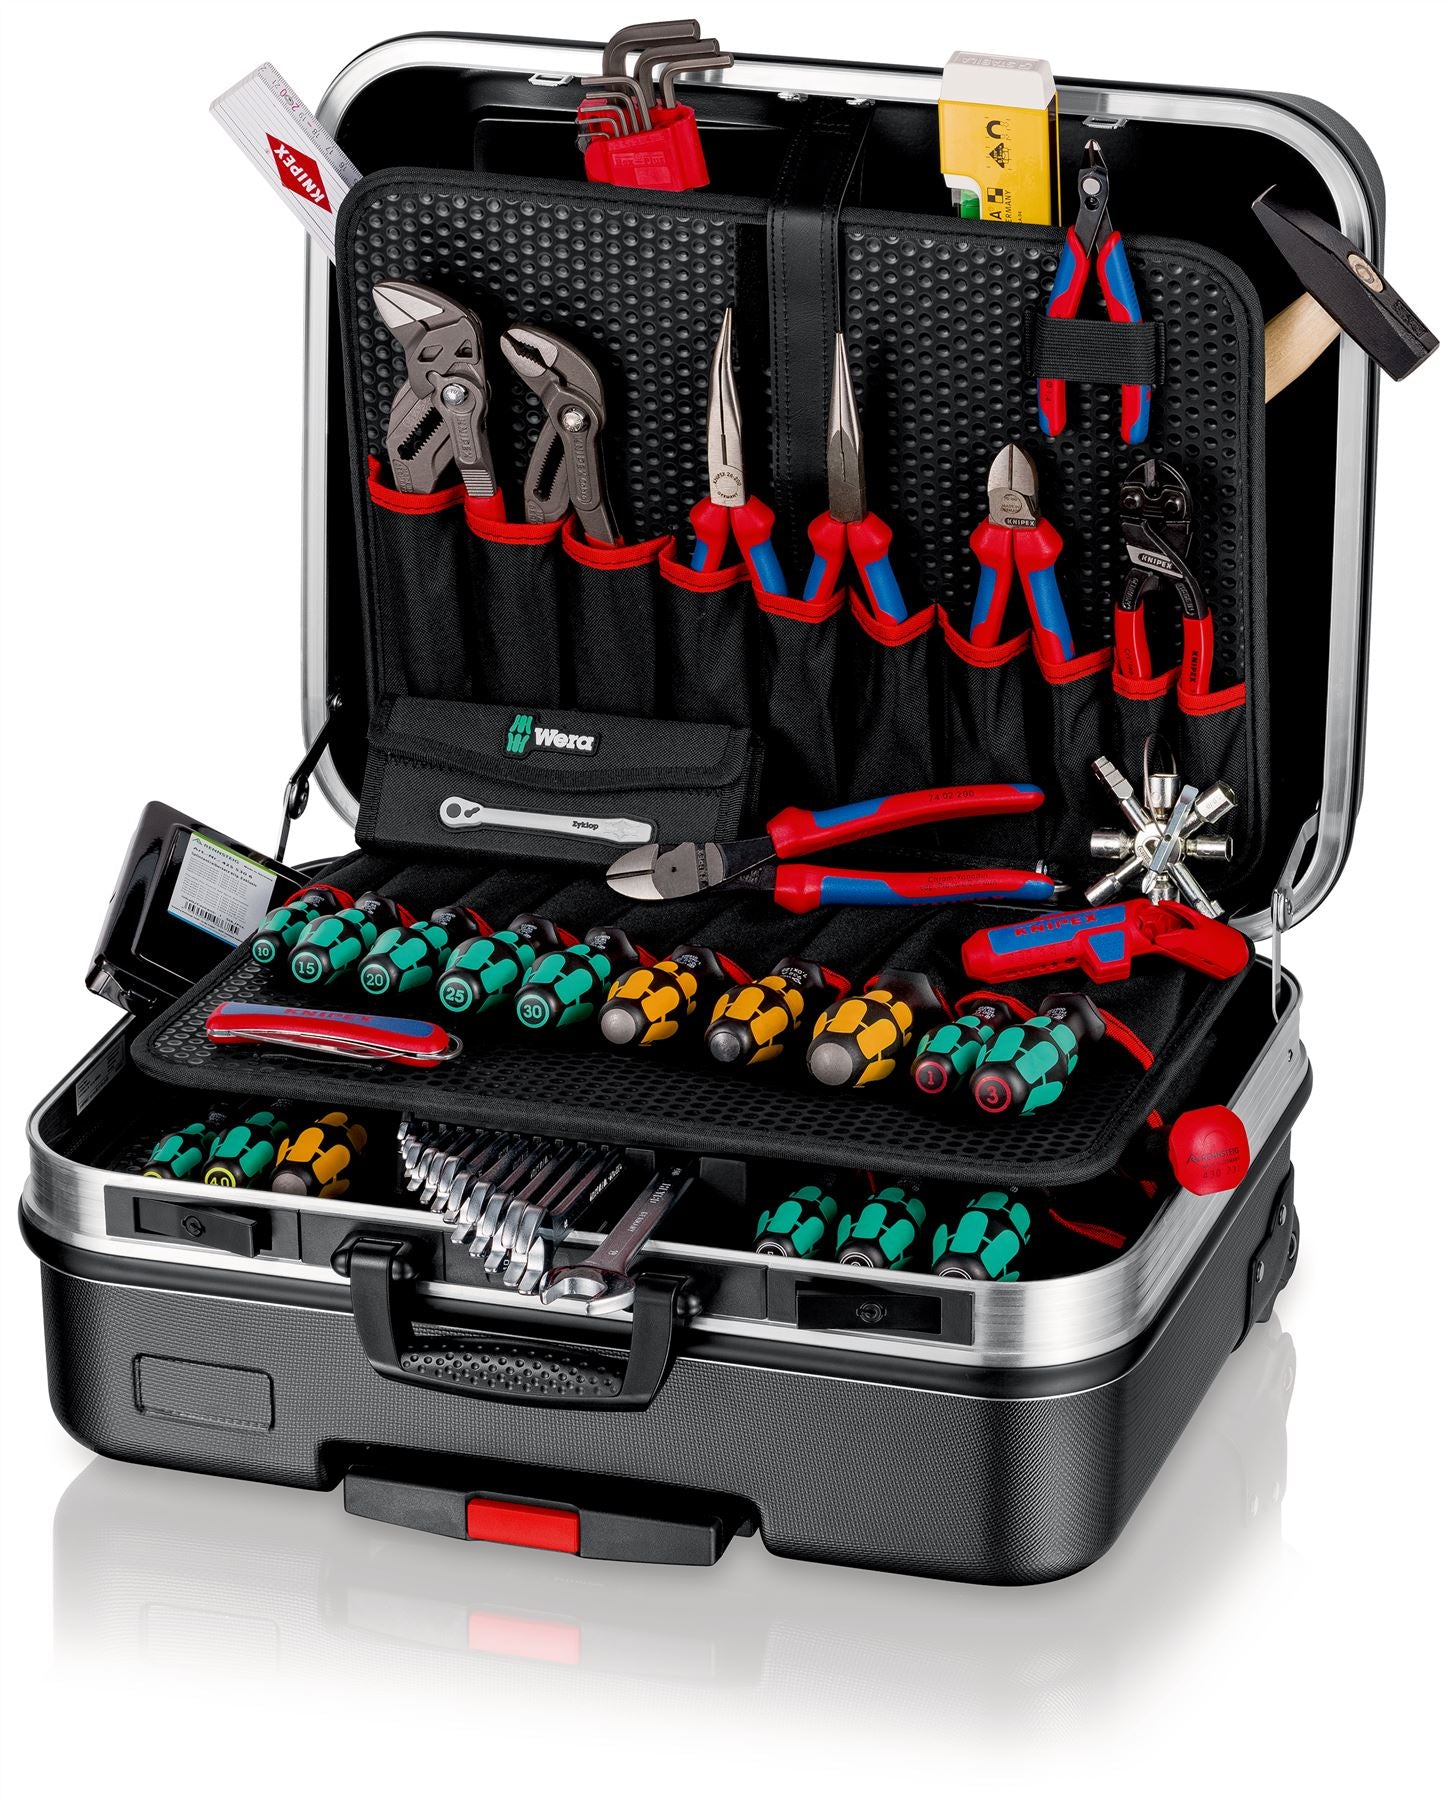 Knipex Tool Case BIG Basic Move Mechanic 79 Pieces with Wera Screwdrivers 00 21 06 M